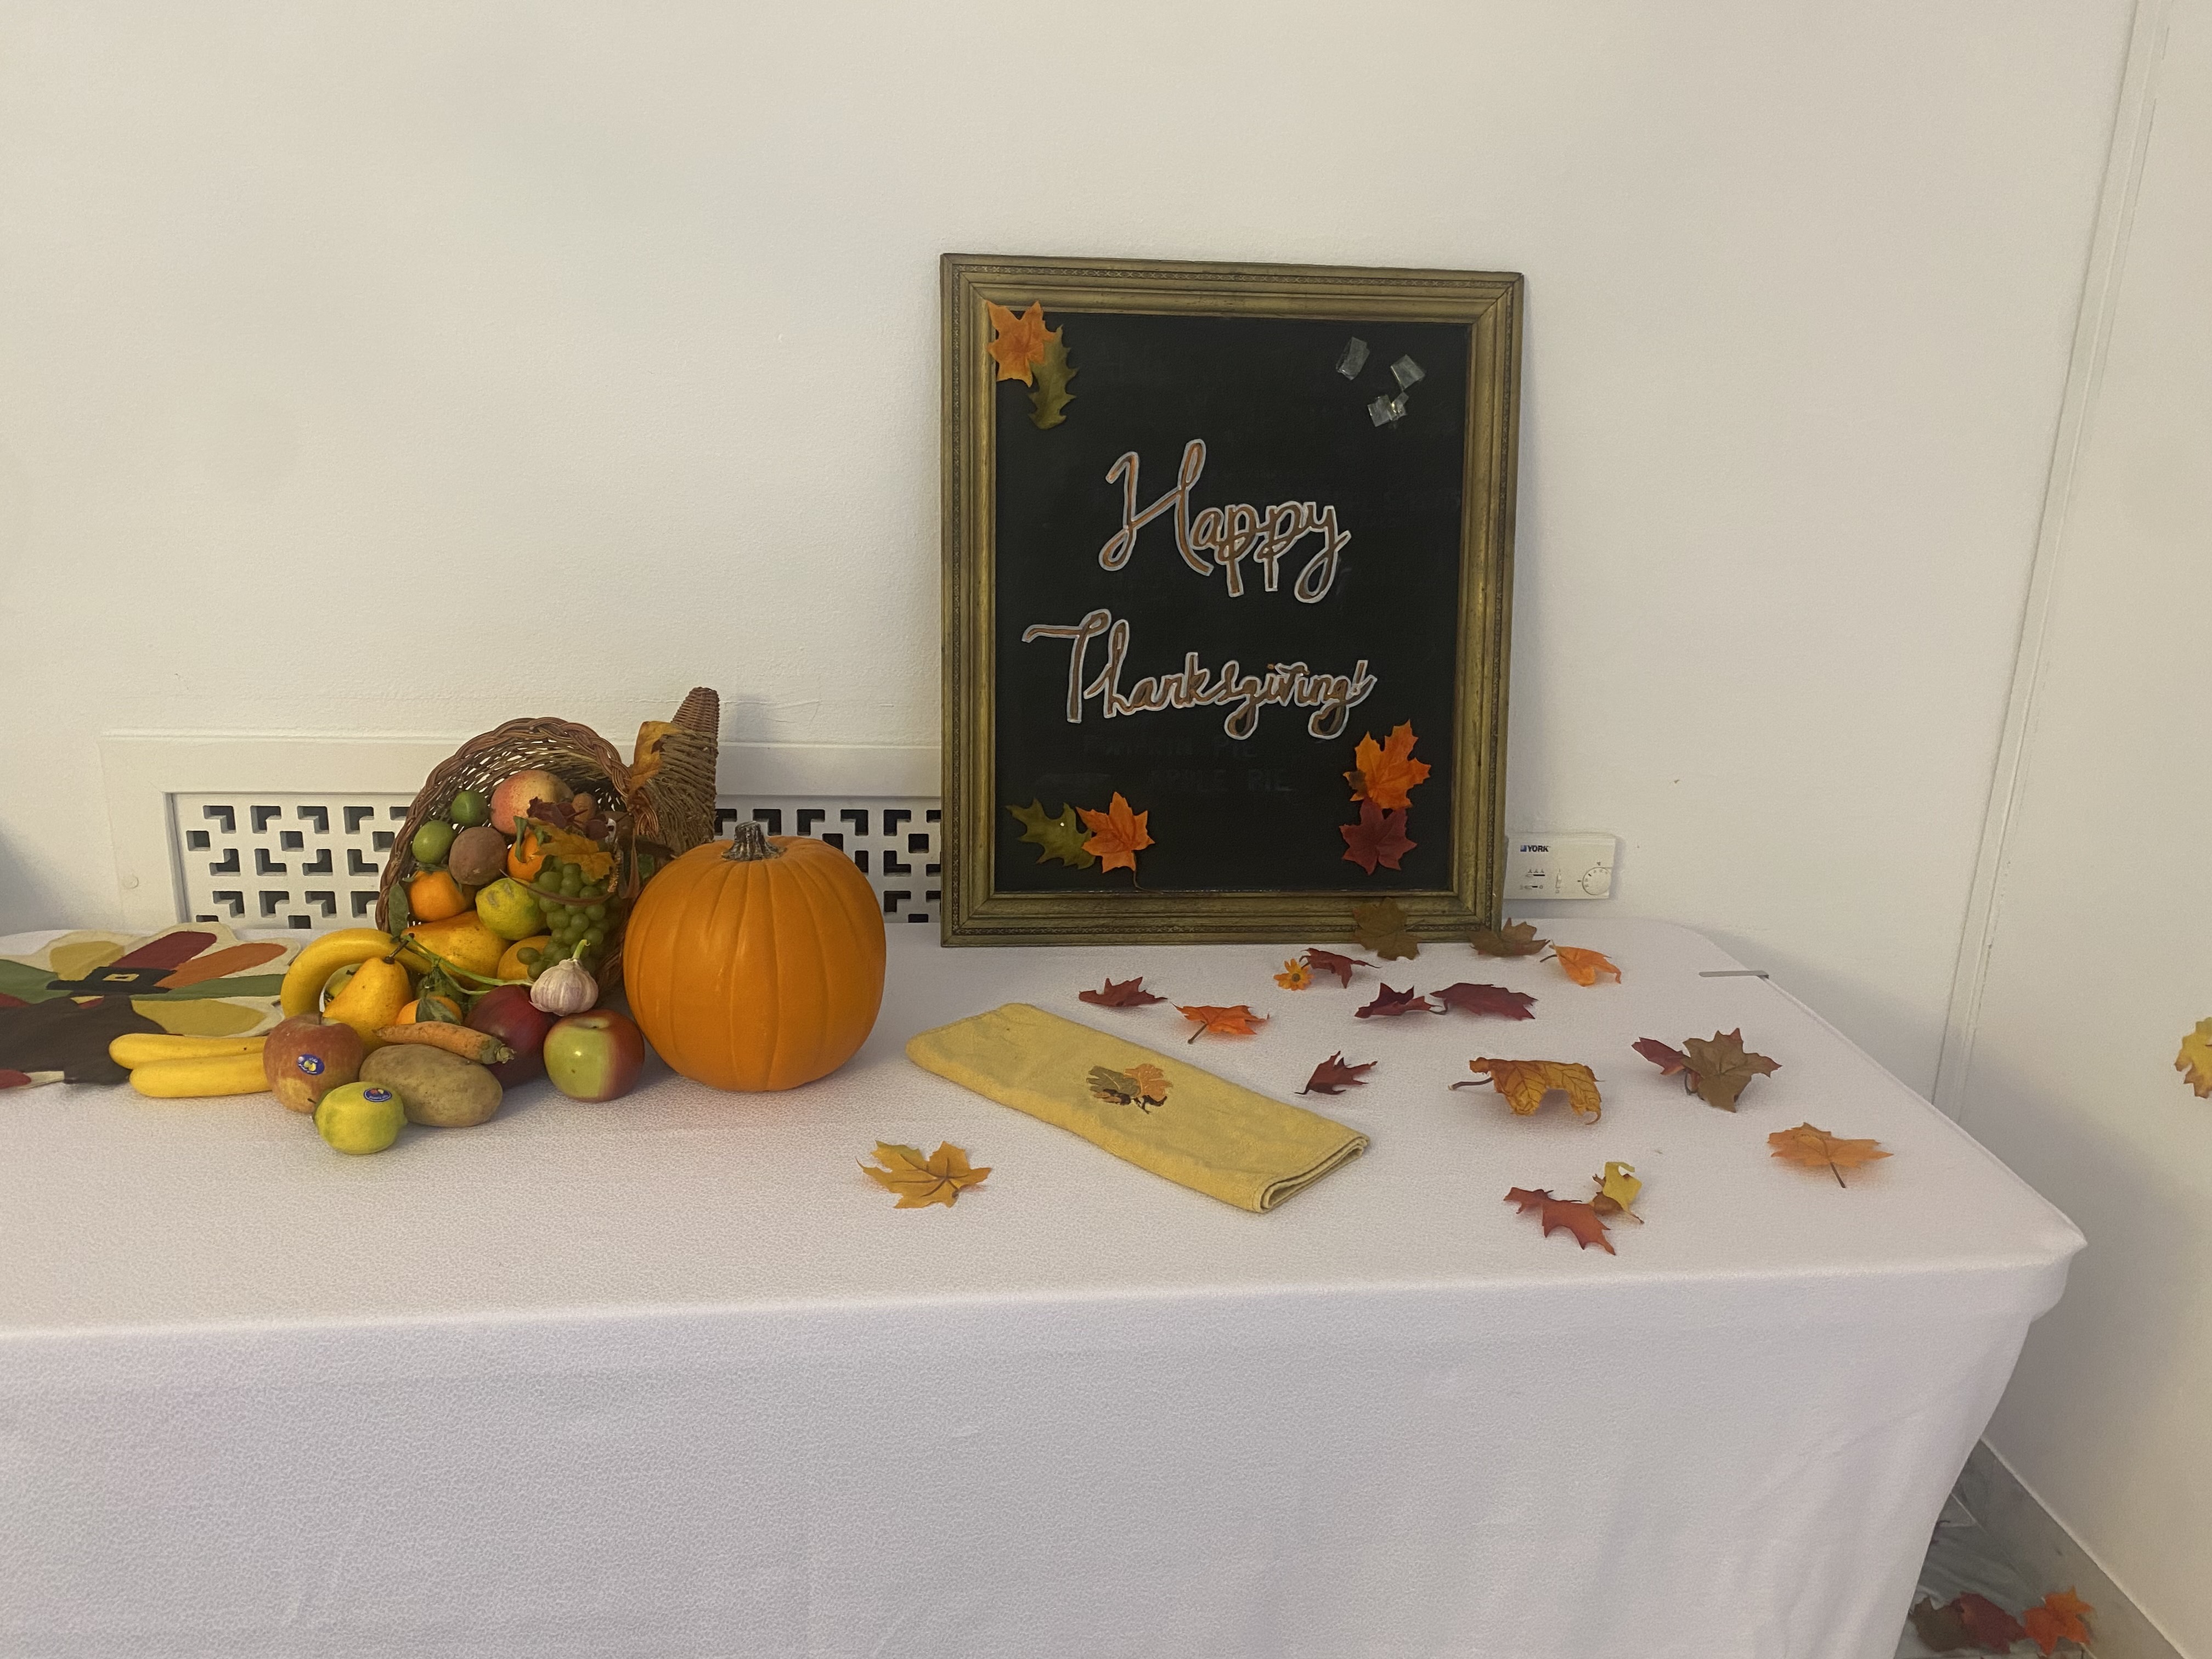 A Happy Thanksgiving sign on a table with decorative leaves and fruits